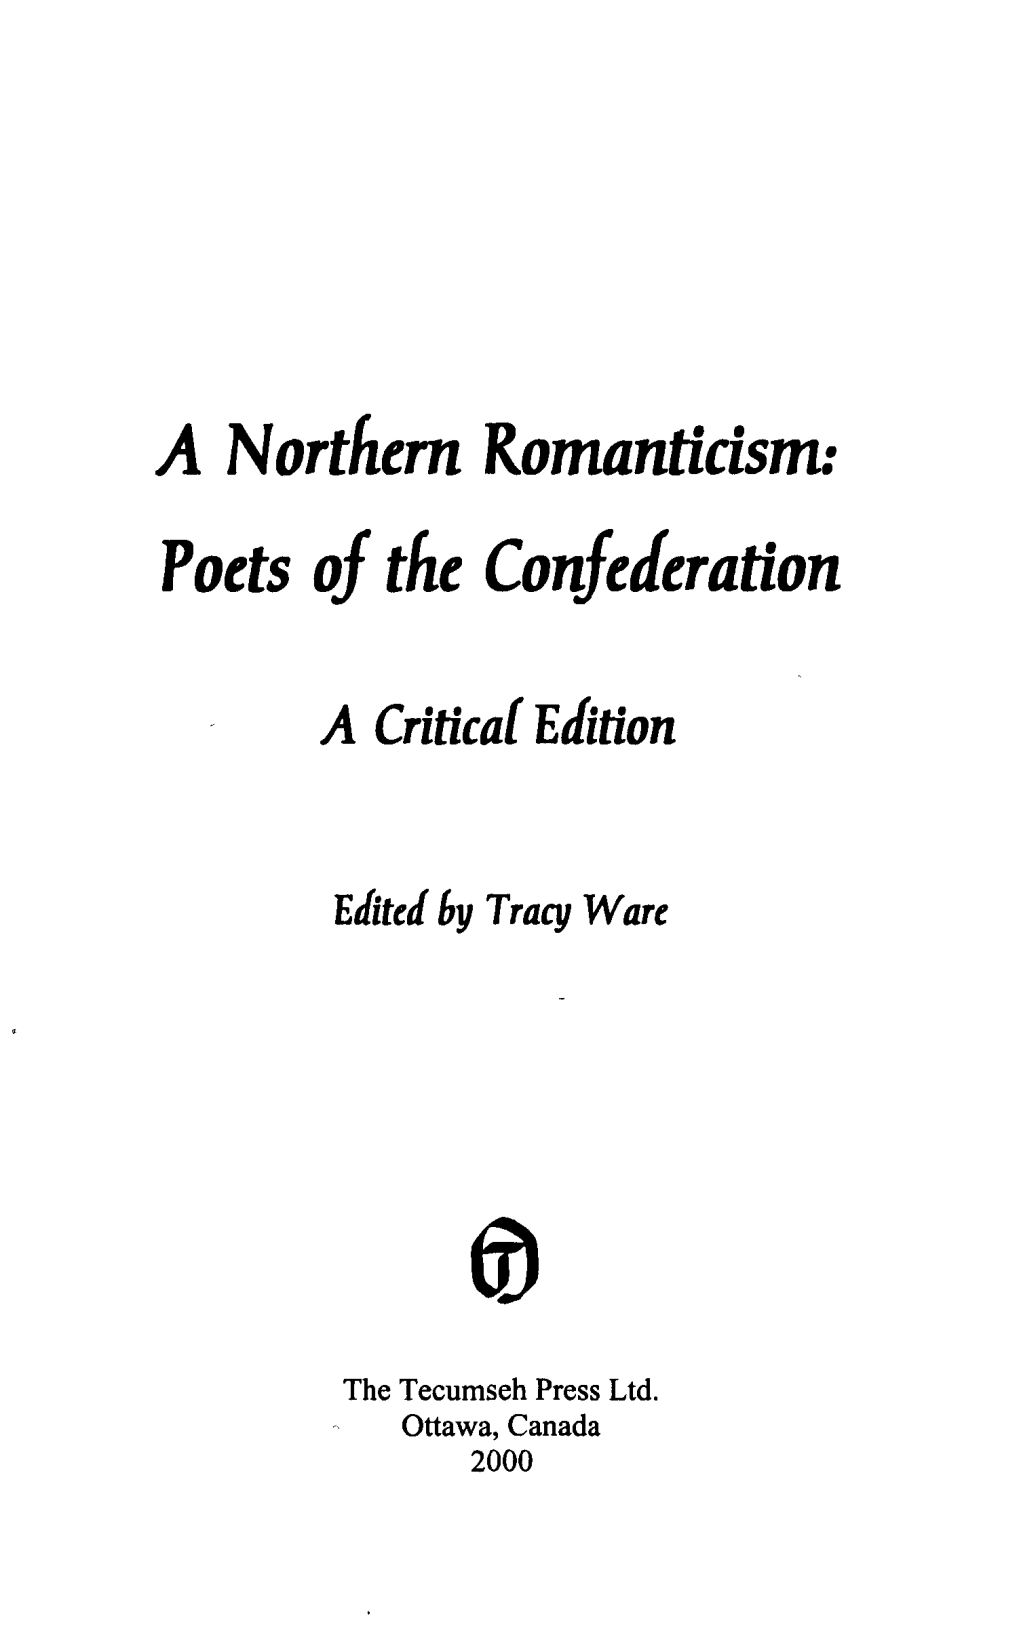 Poets of the Confederation